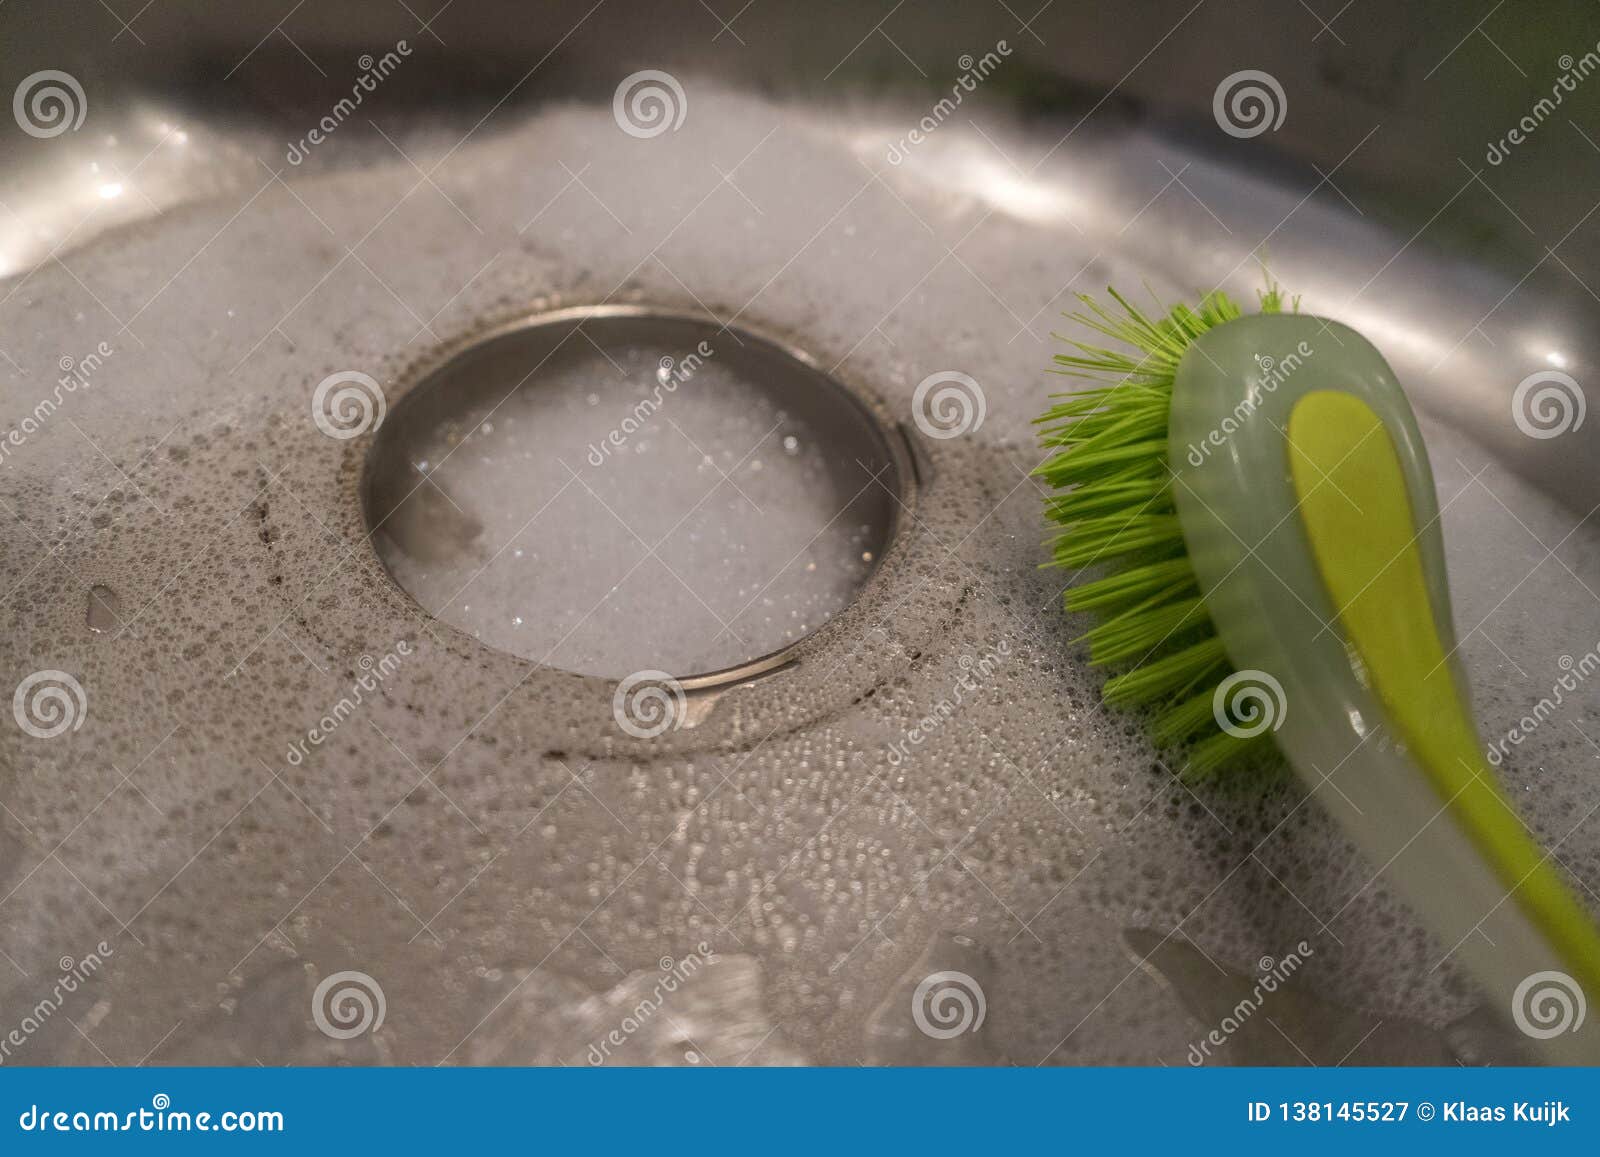 Metal Water Sink With Green Cleaning Brush Industrial Look